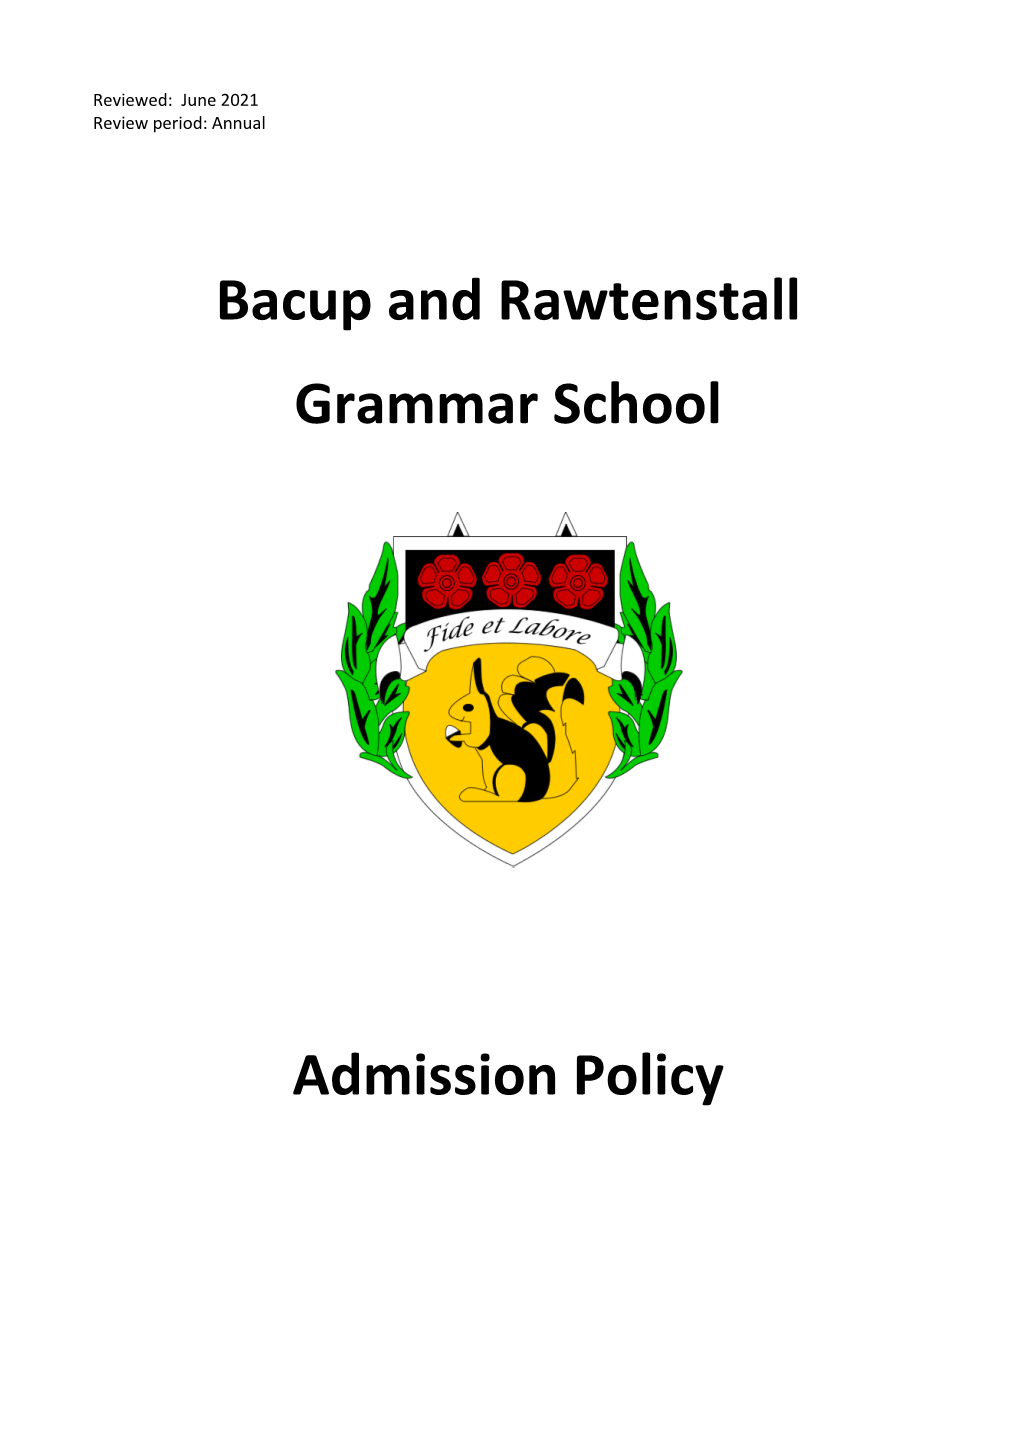 Bacup and Rawtenstall Grammar School Admission Policy